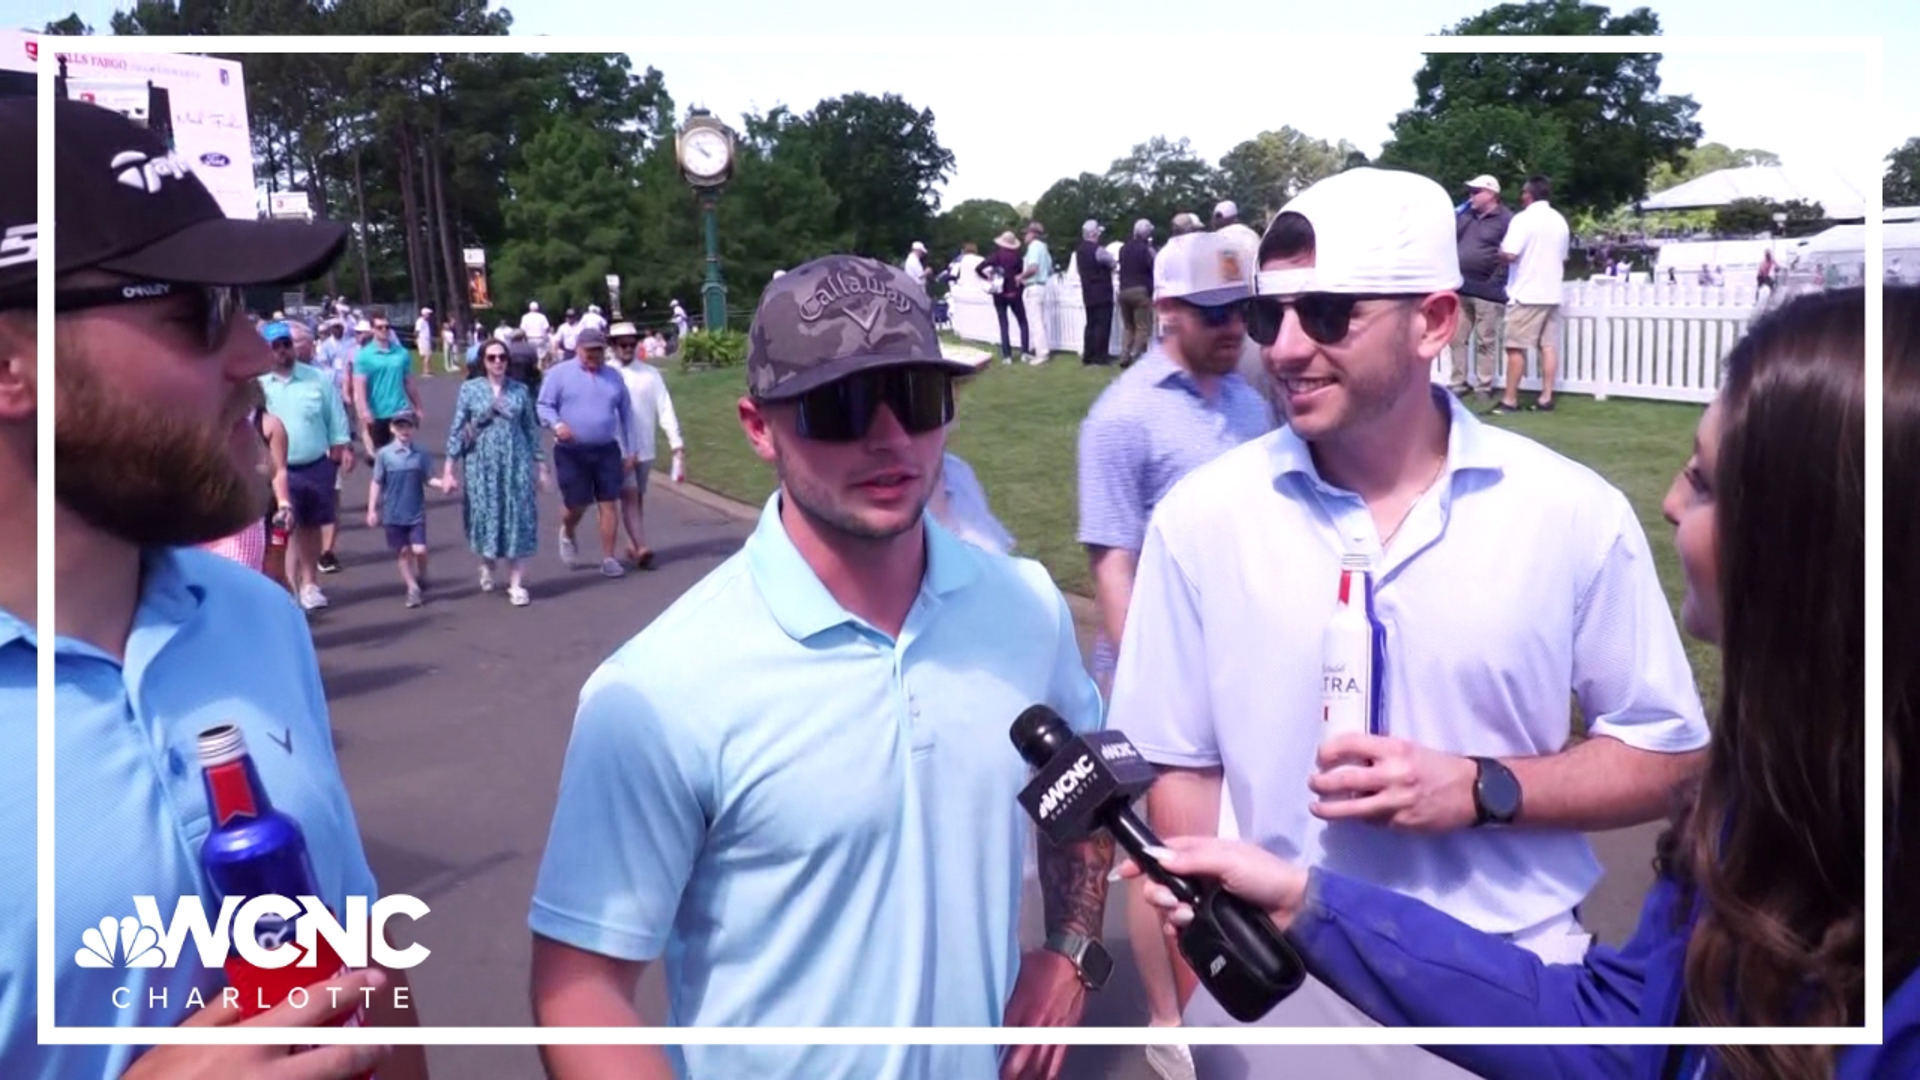 Meghan Bragg hears from folks at Quail Hollow to get their thoughts on the championship!